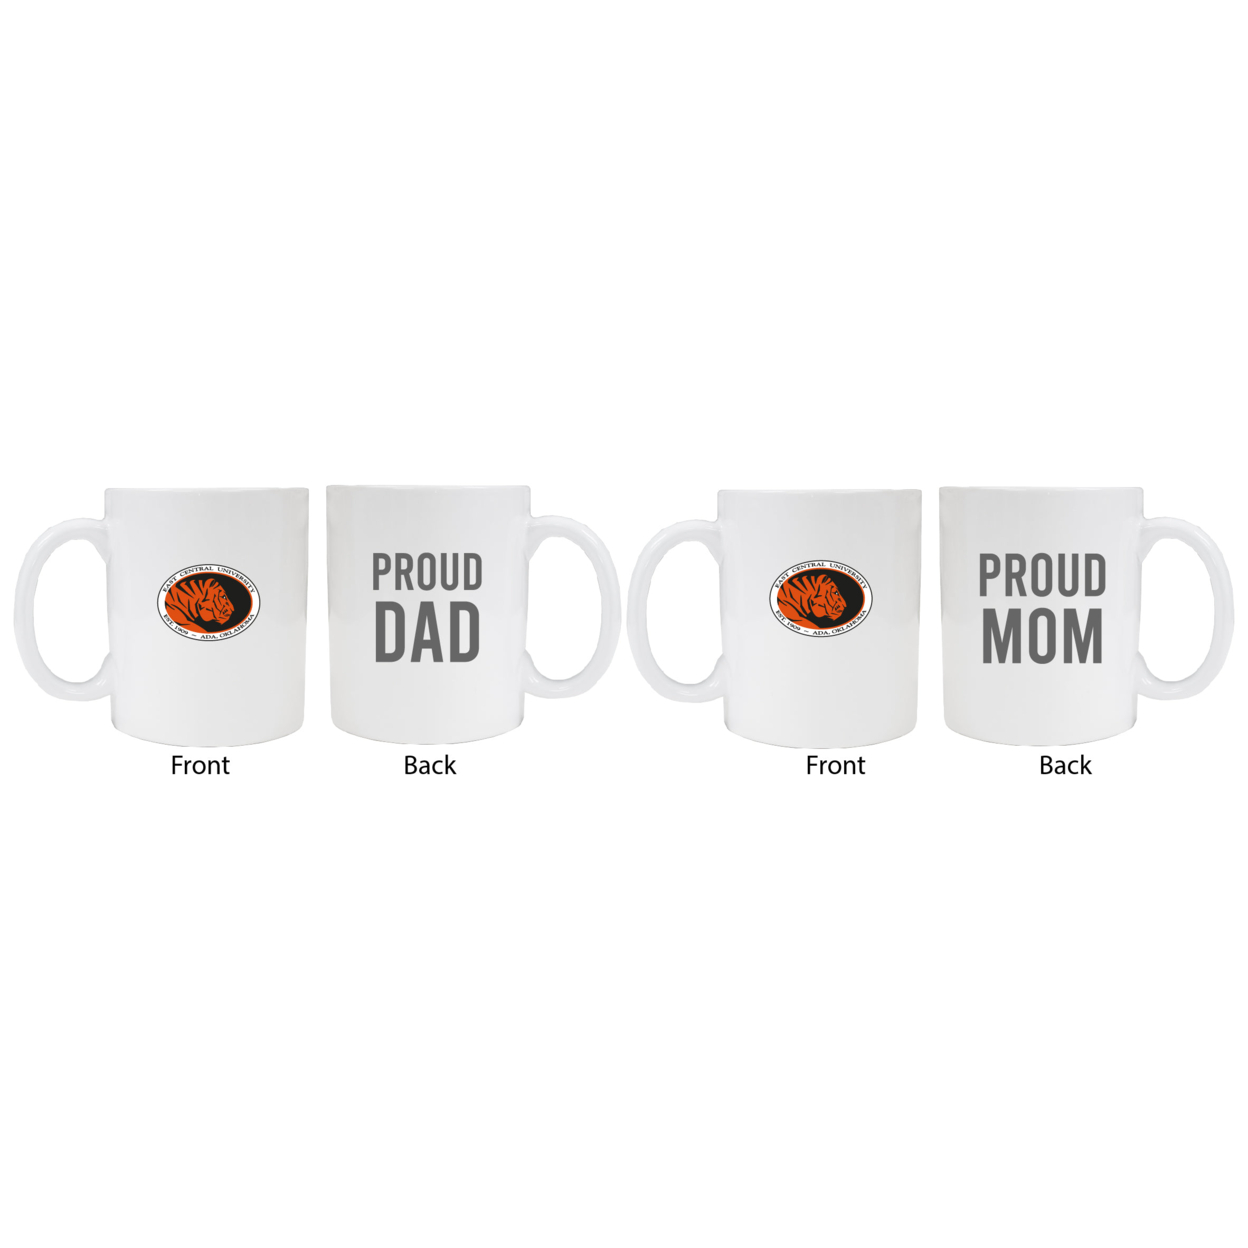 East Central University Tigers Proud Mom And Dad White Ceramic Coffee Mug 2 Pack (White).